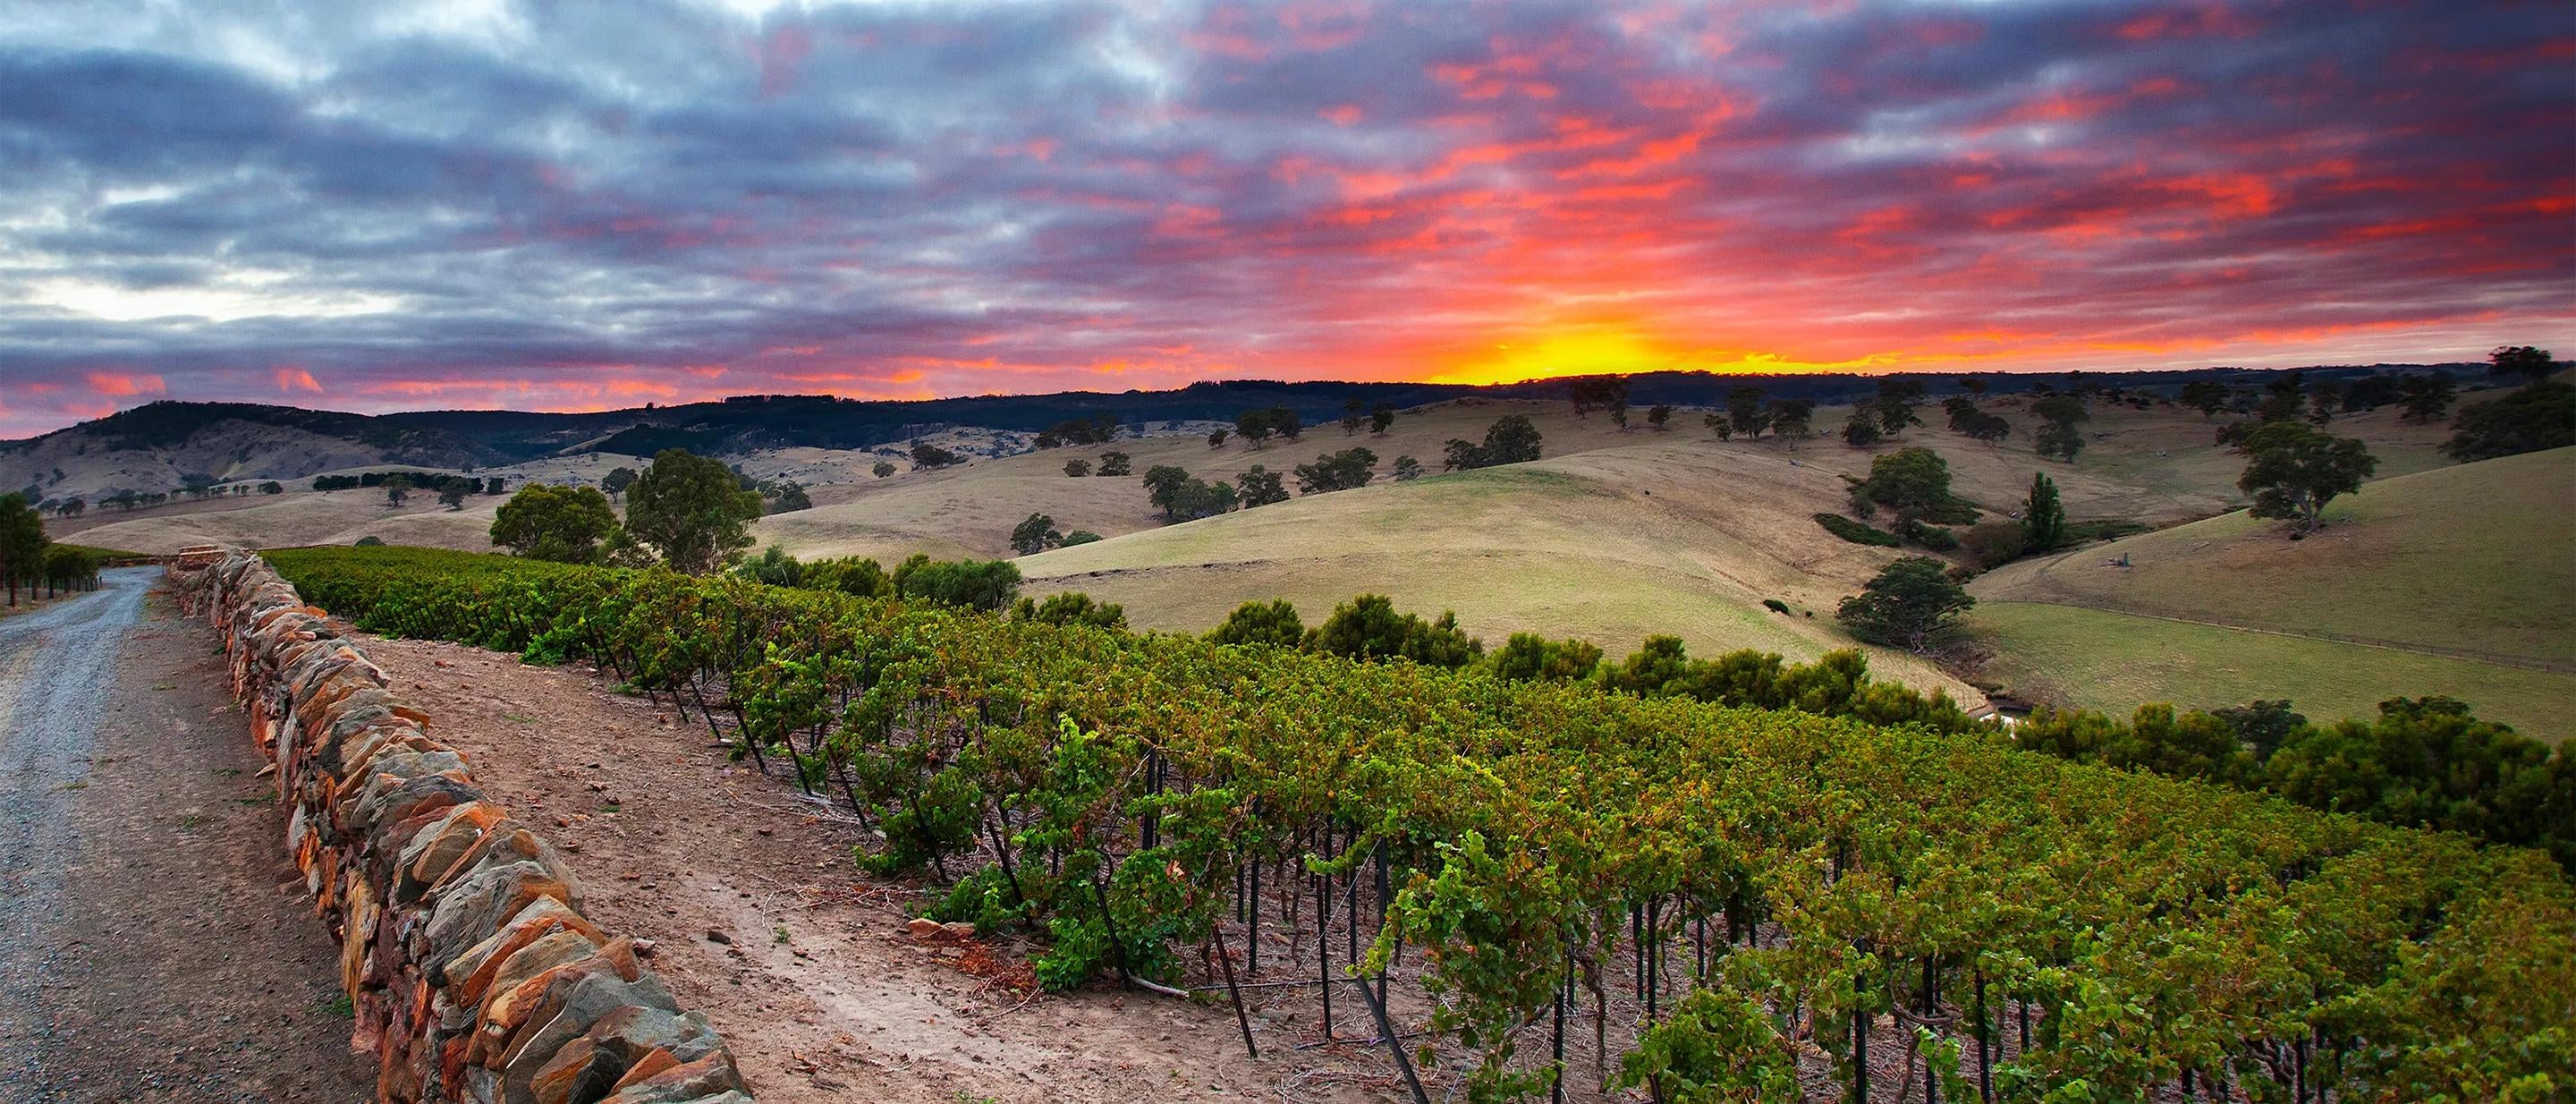 Jacob's Creek, in the Barossa Valley, South Australia.